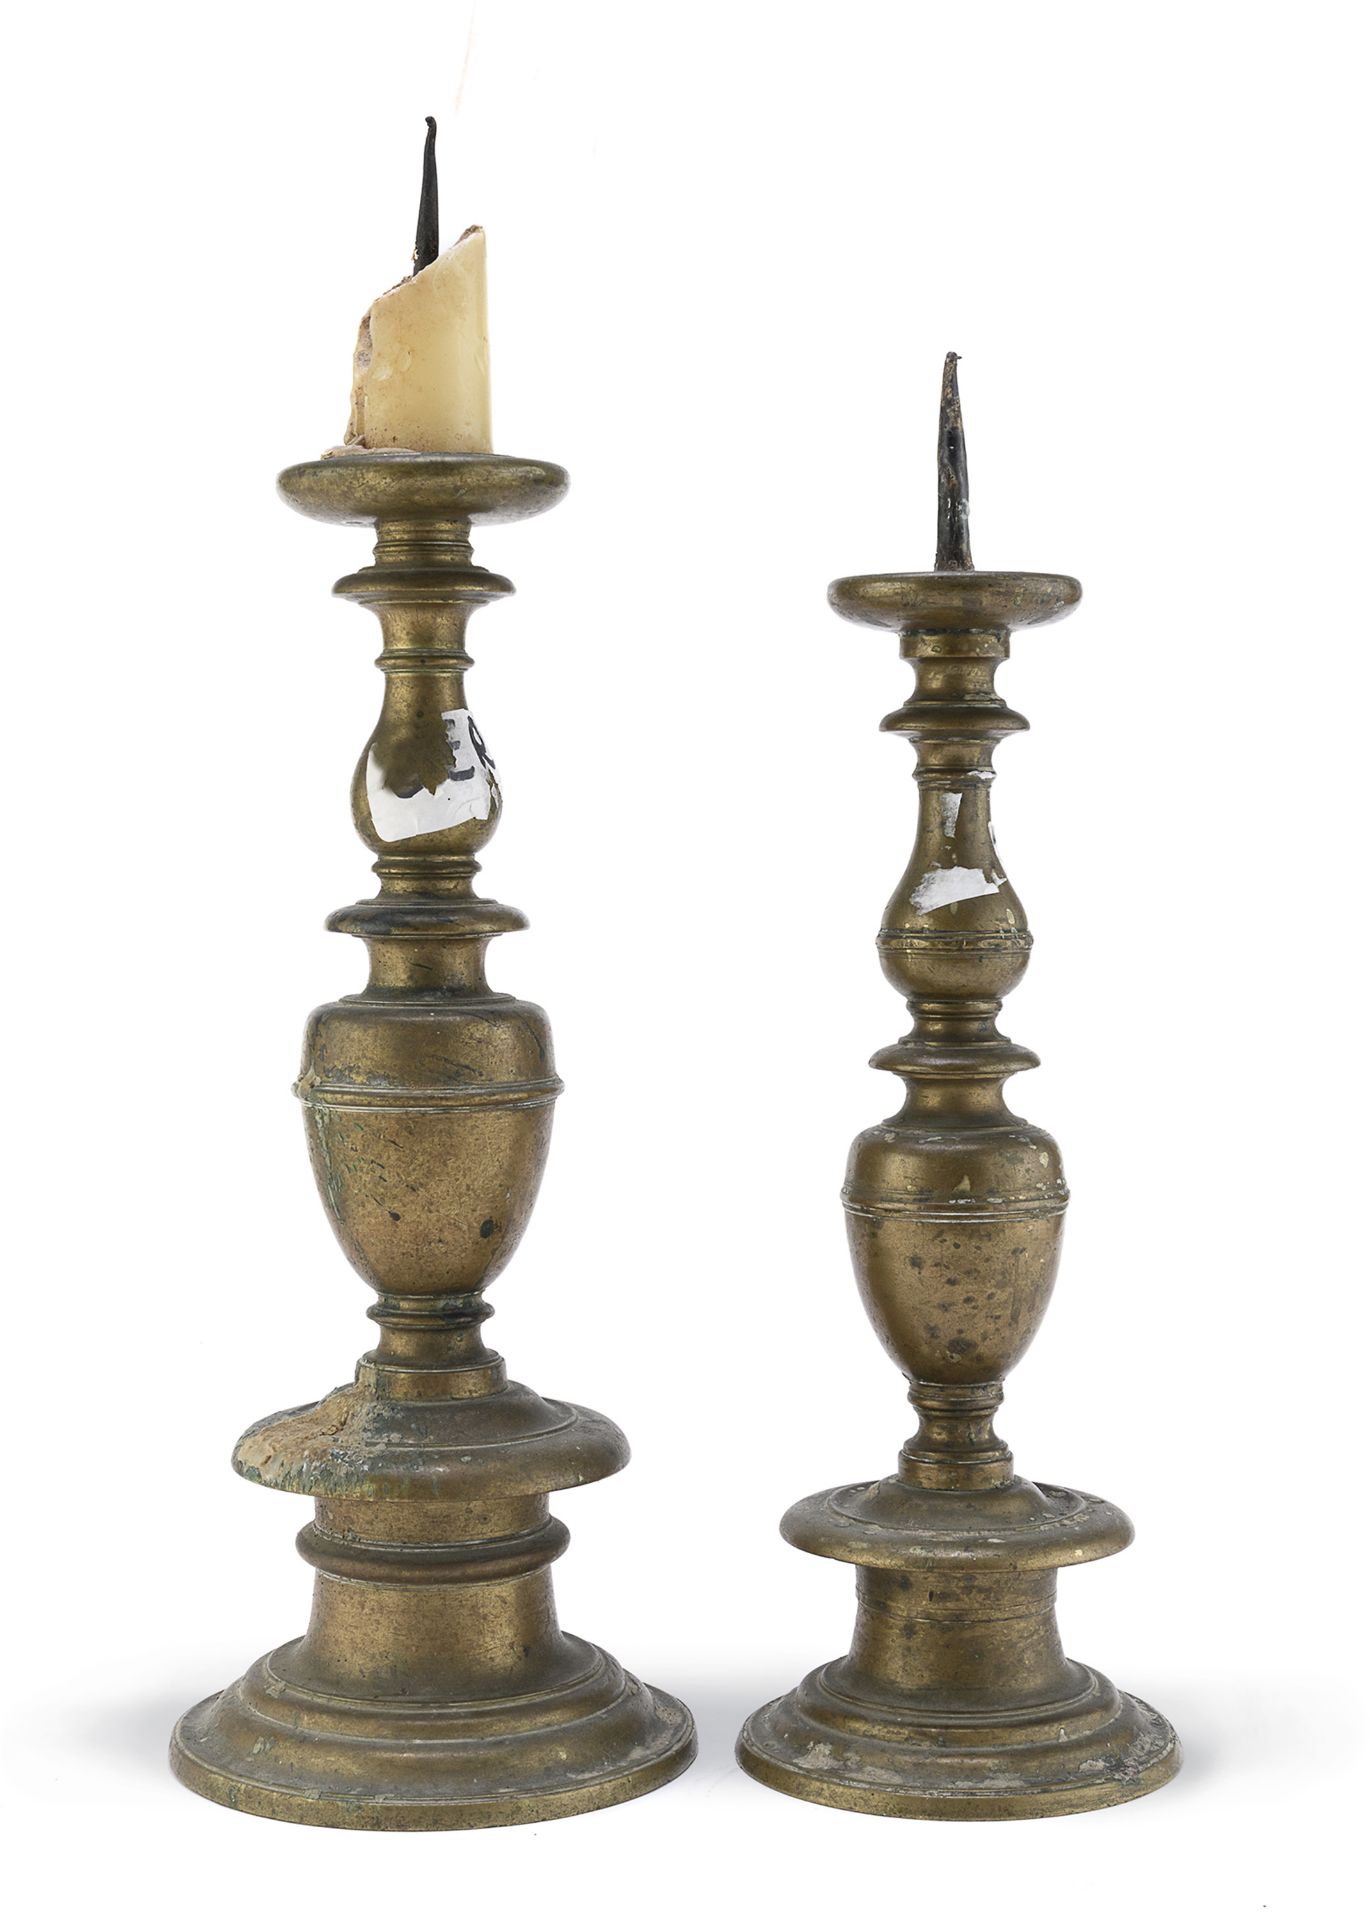 TWO BRONZE CANDLESTICKS CENTRAL ITALY 18TH CENTURY